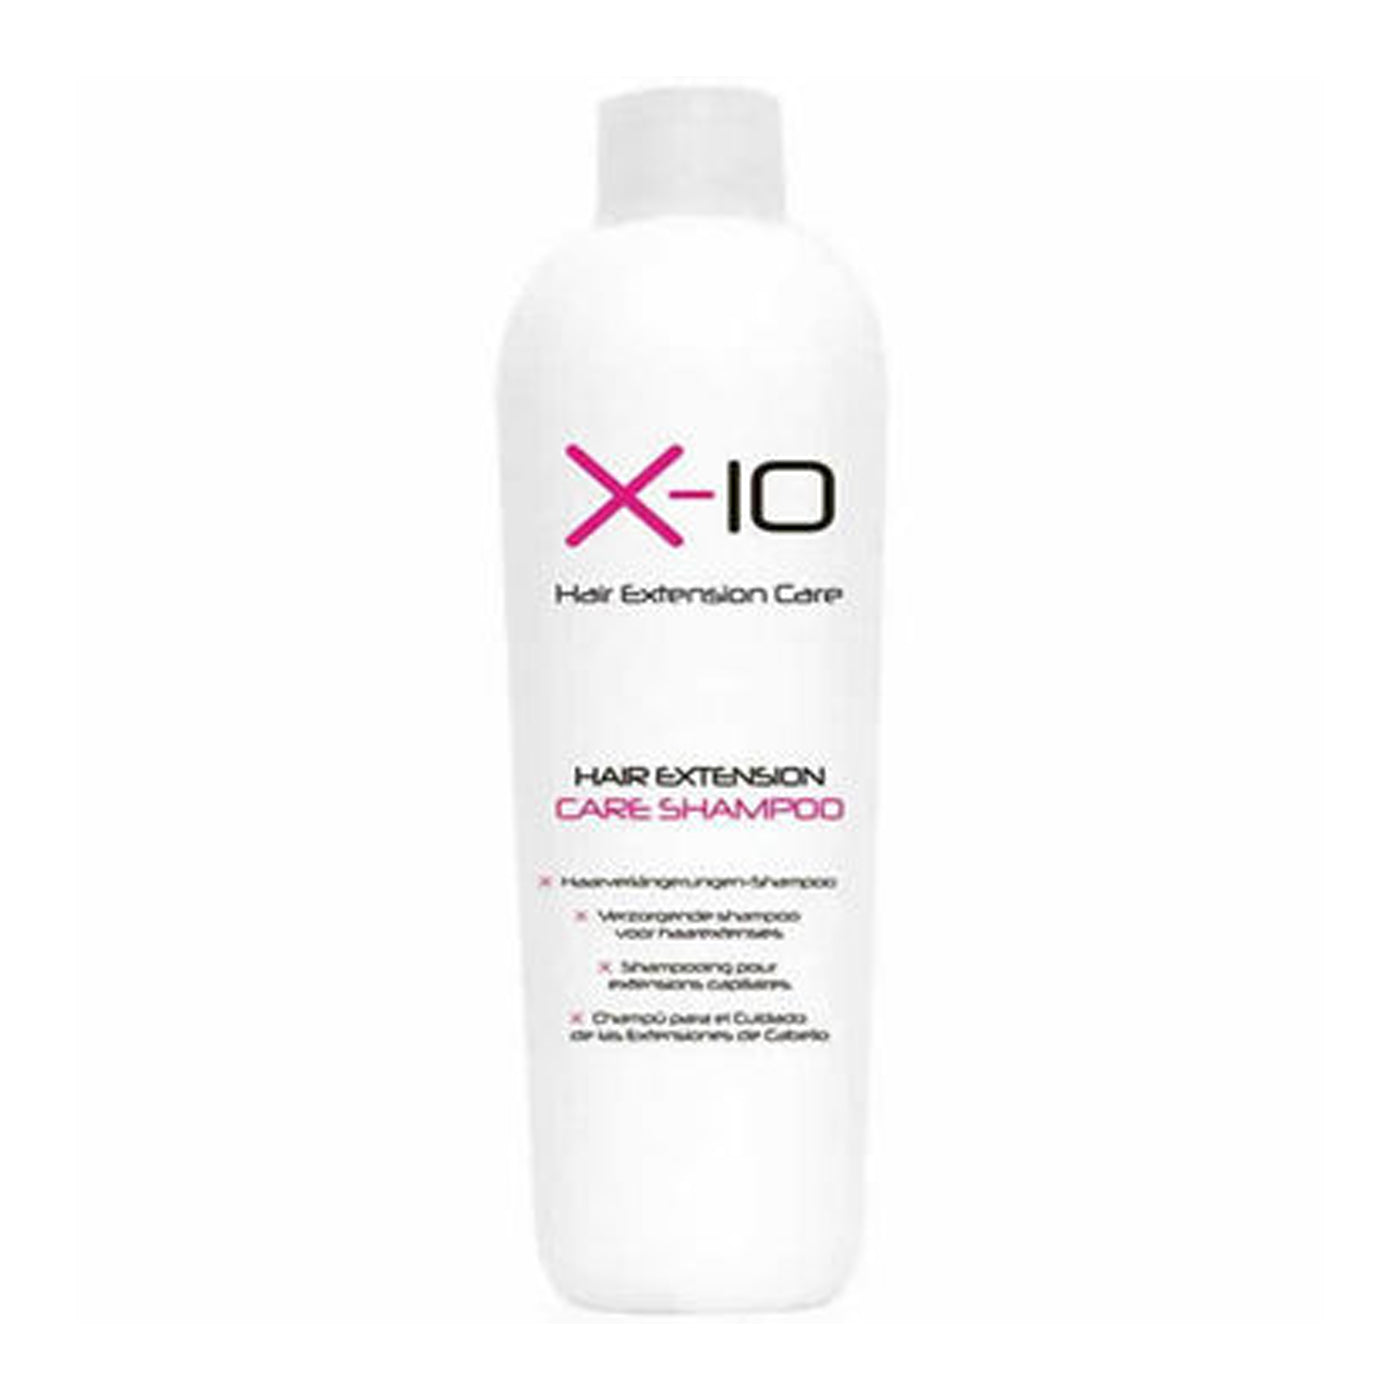 X-10 Hair Extension Care Shampoo (250ml) - Ultimate Hair and Beauty